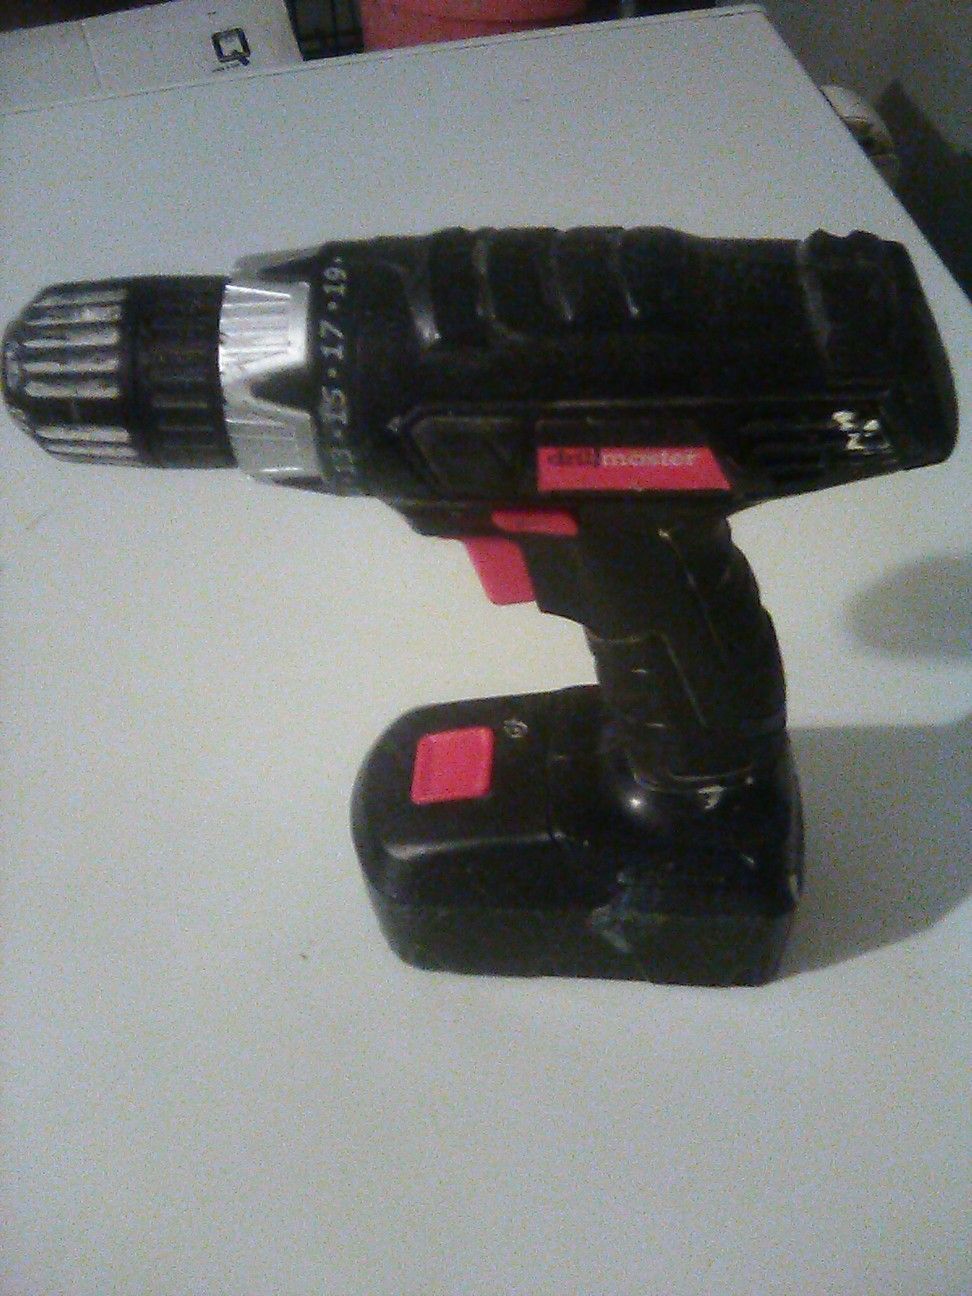 Drill don't have charger but do work have a little power still in drill